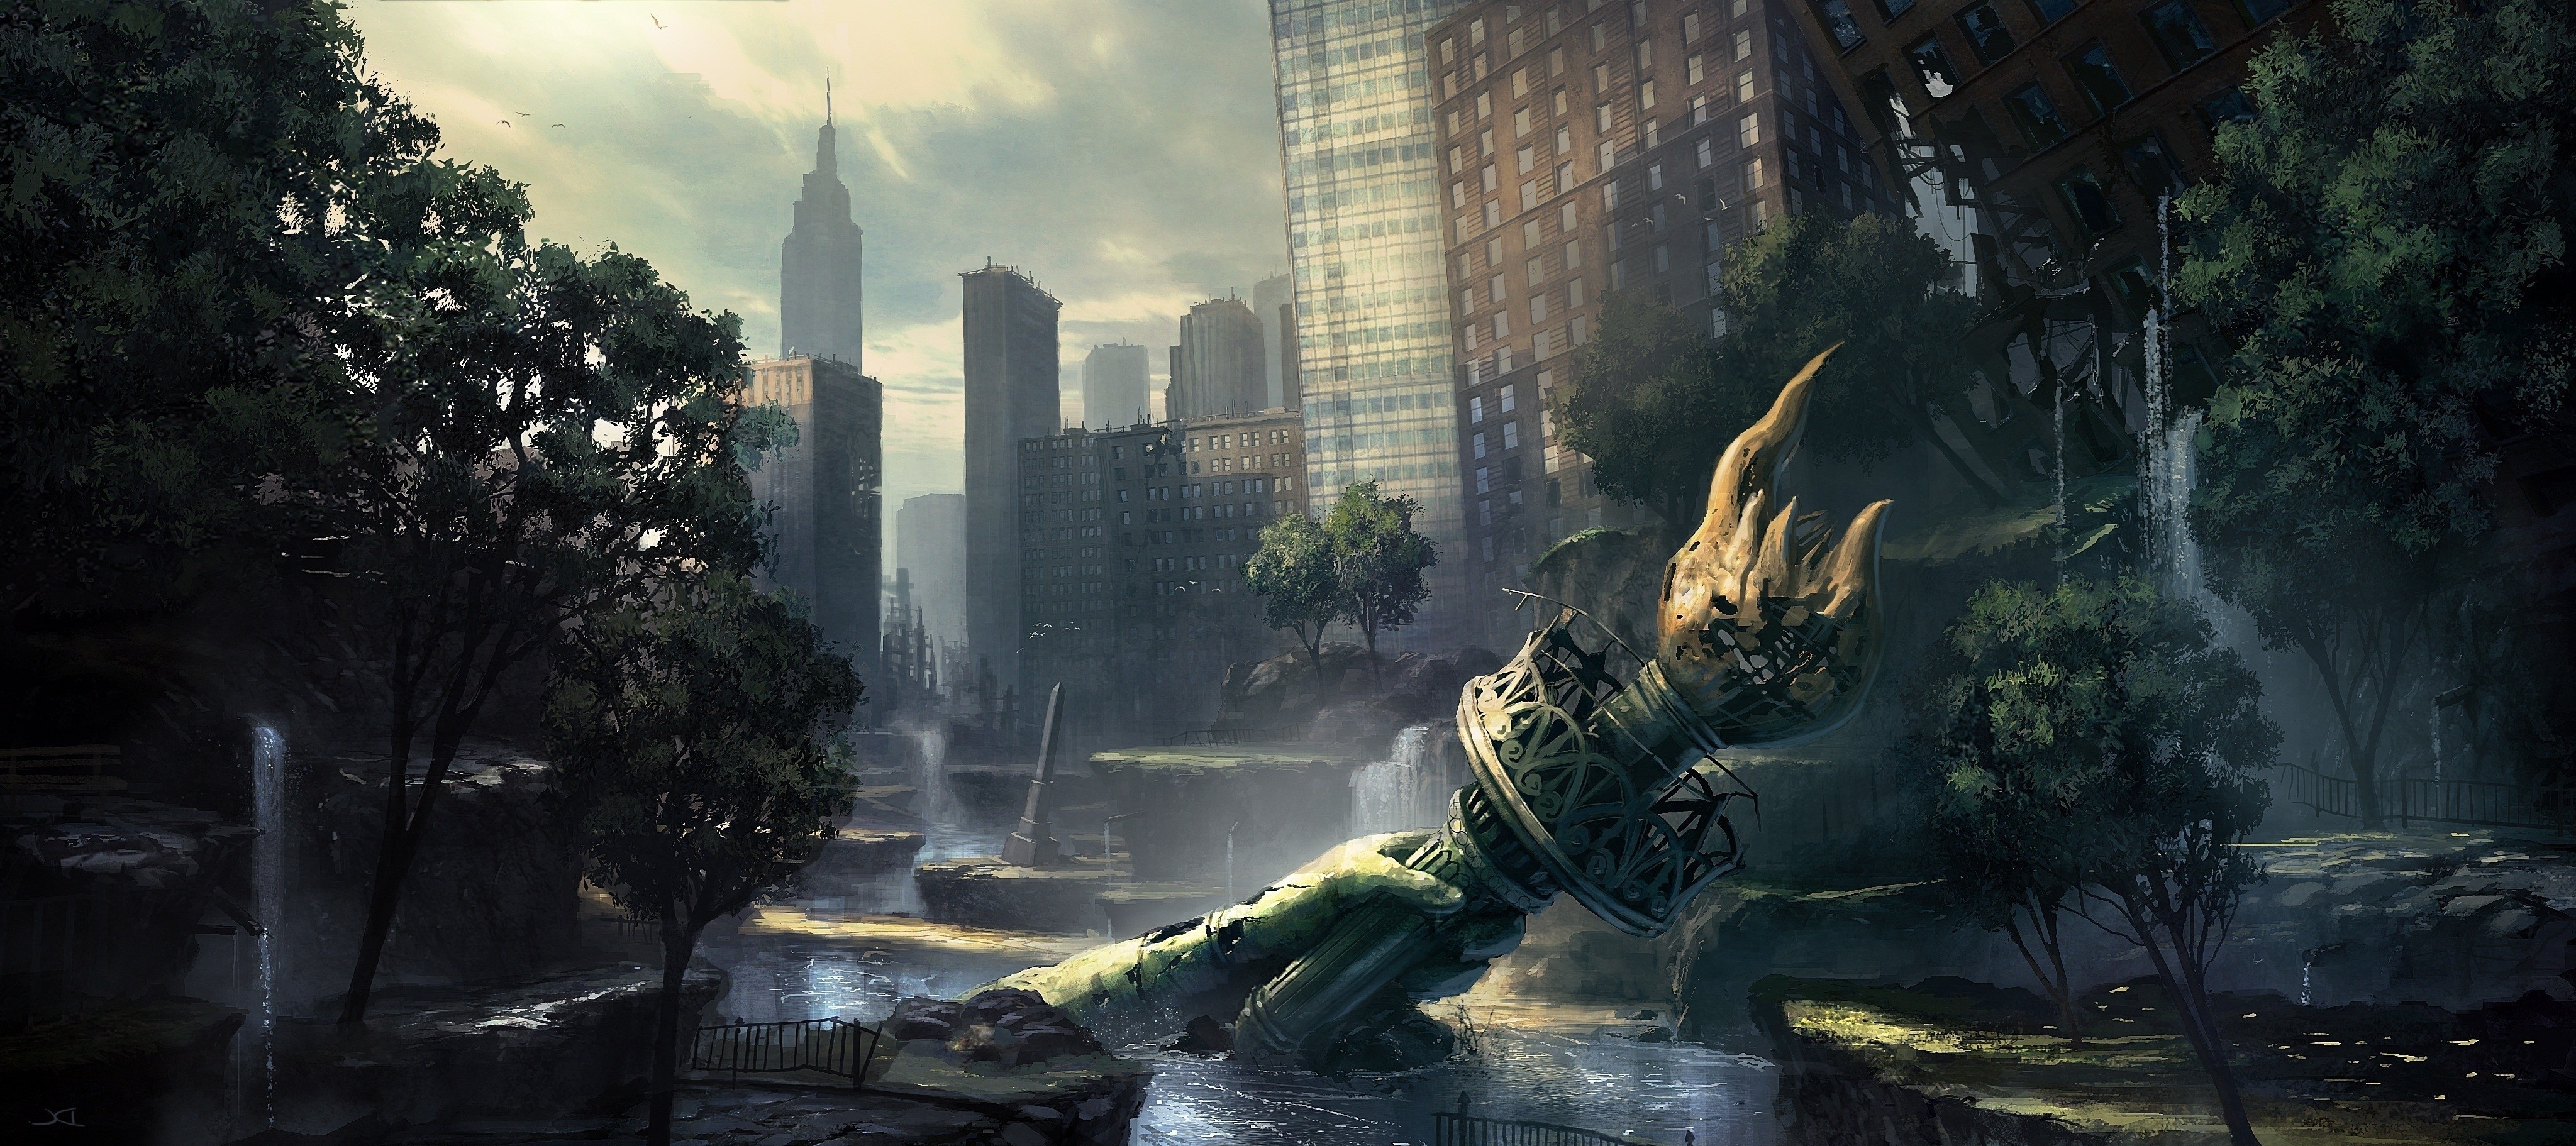 General 4096x1823 Crysis Crysis 2 video games apocalyptic video game art New York City science fiction